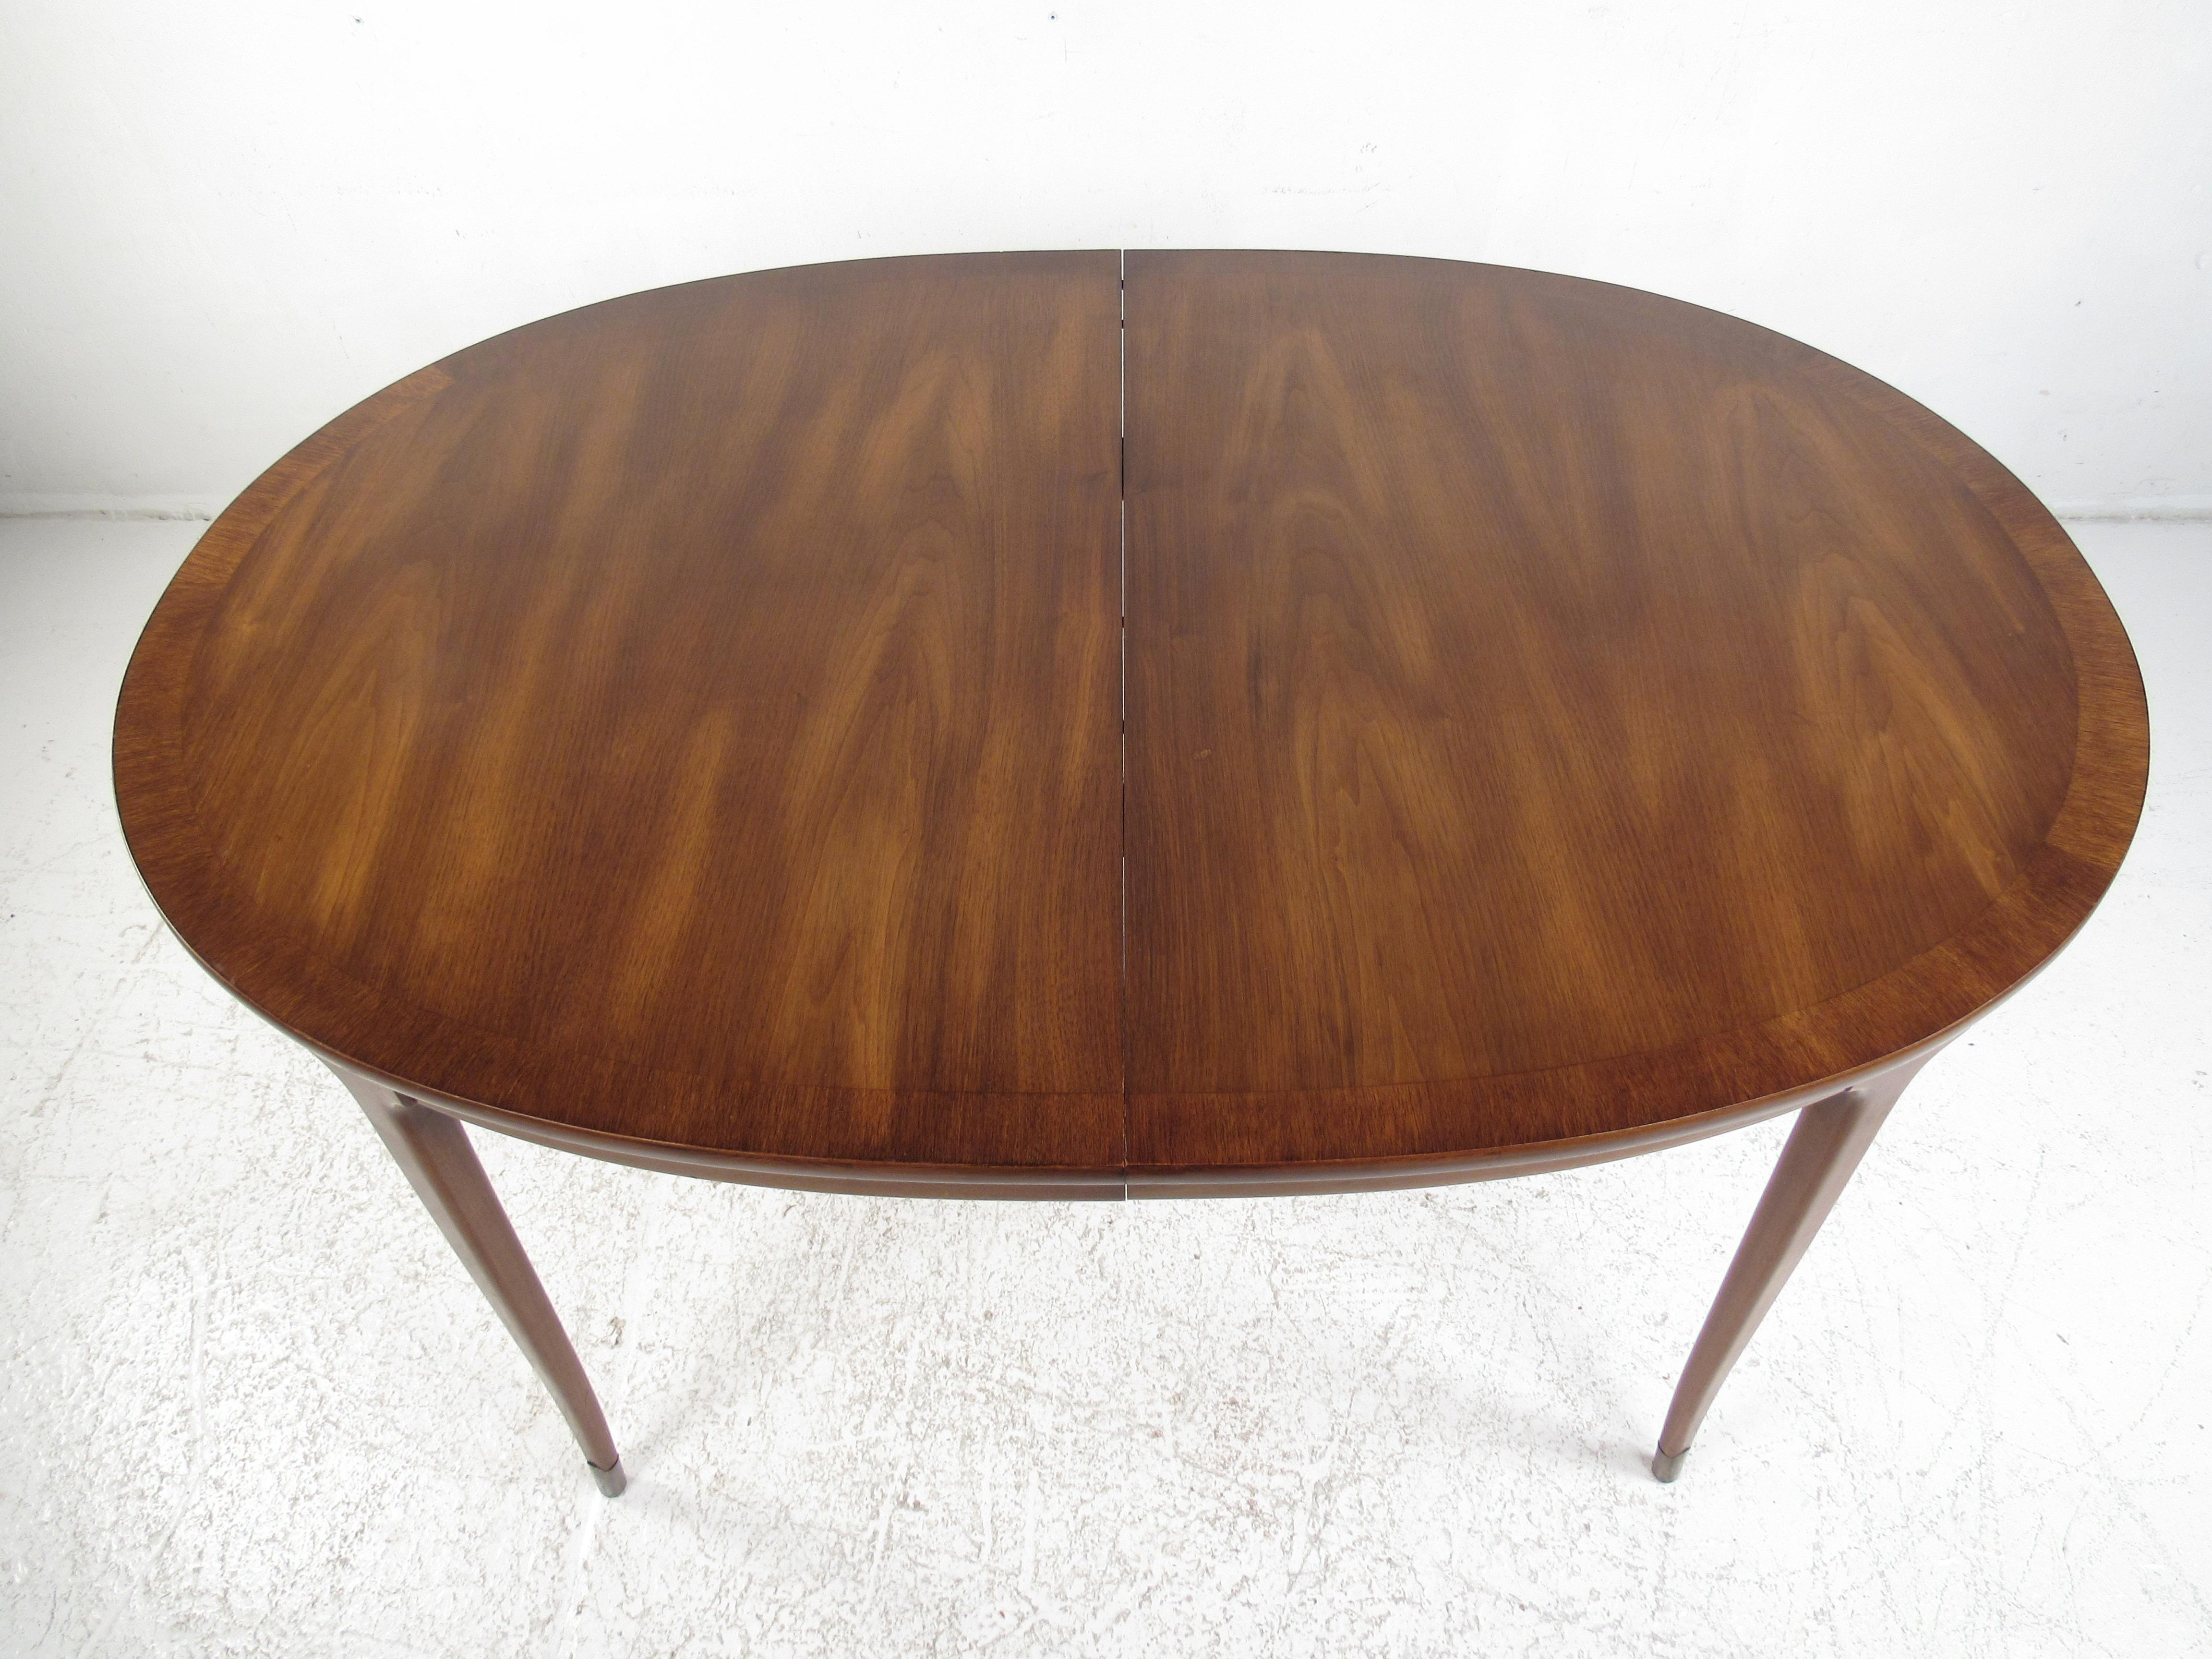 This beautiful vintage modern dining table boasts an oval top and long tapered legs with brass feet. A sleek design that extends from 58 inches wide to 90 inches wide, ensuring plenty of room for guests. Sturdy construction with elegant walnut wood